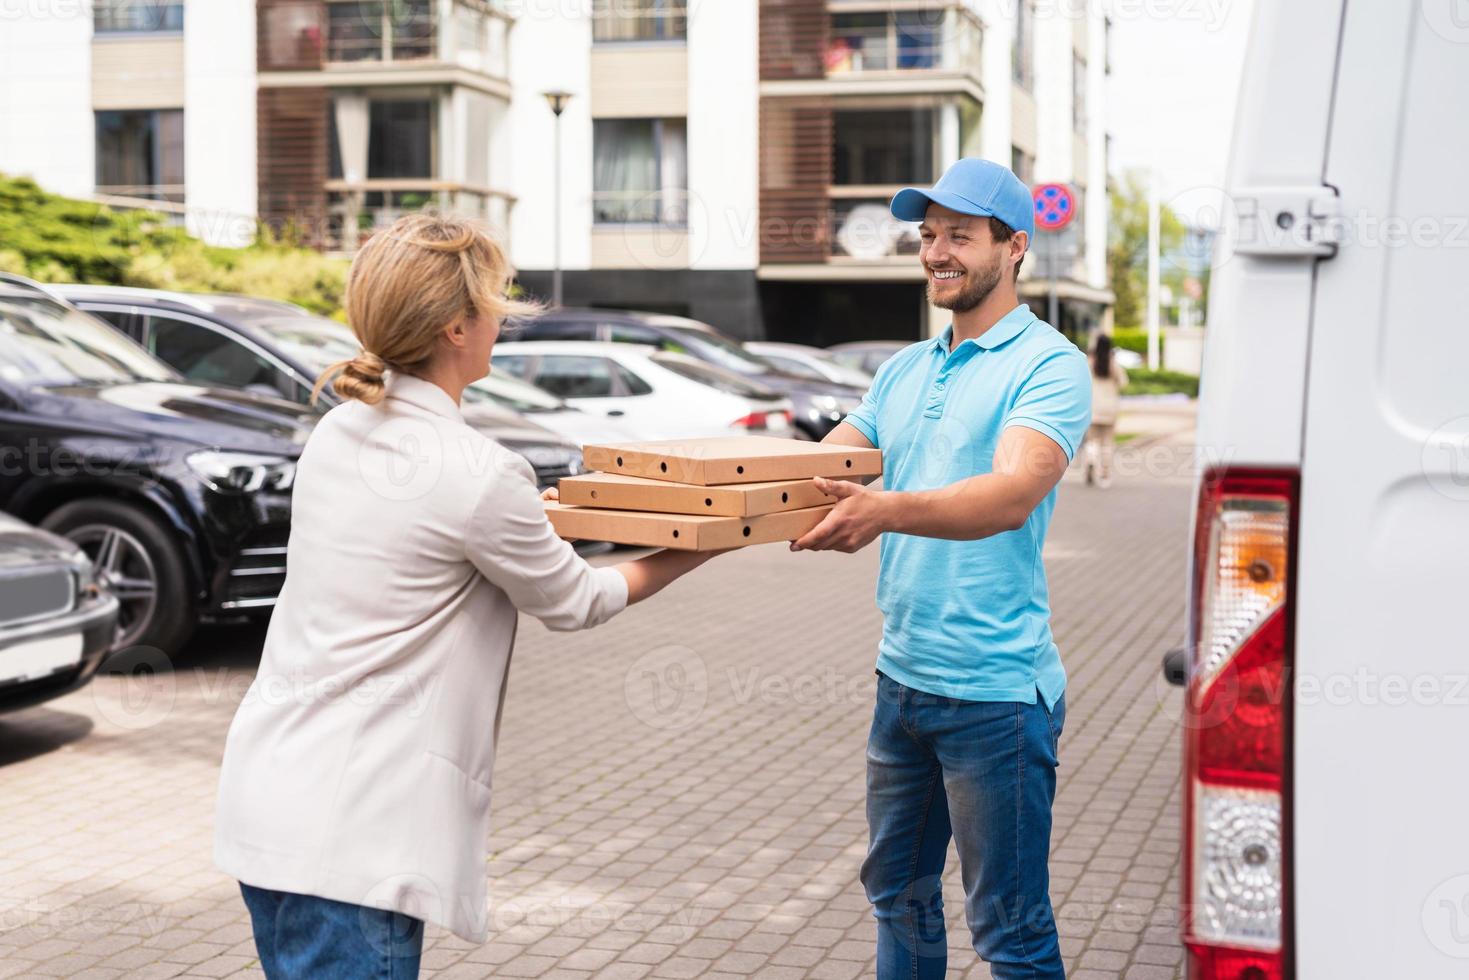 Delivery man wearing blue uniform delivers pizza to a woman client photo